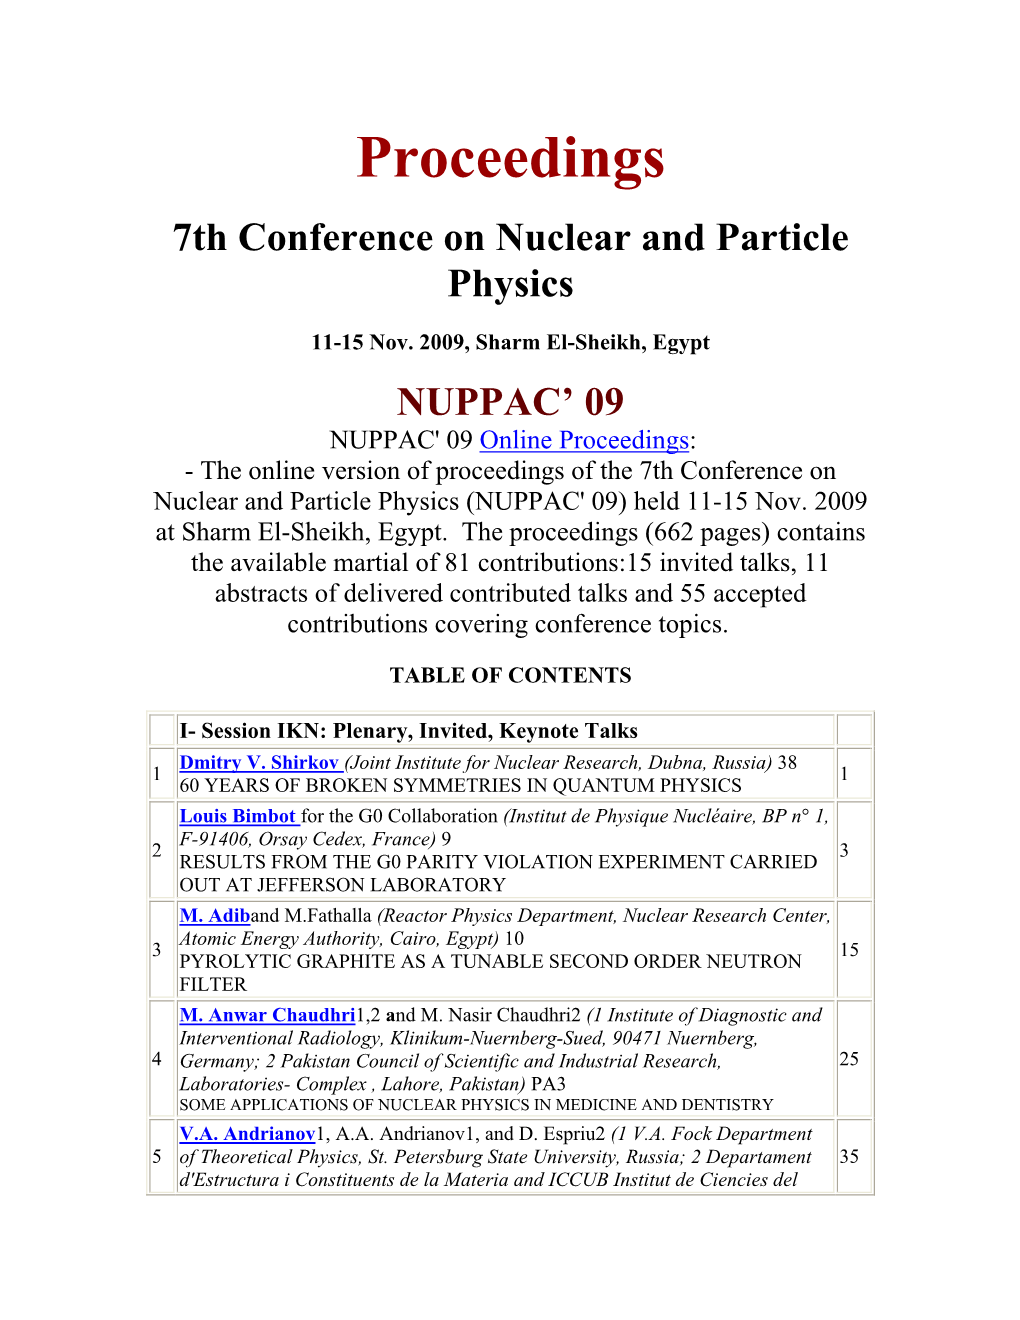 Proceedings 7Th Conference on Nuclear and Particle Physics